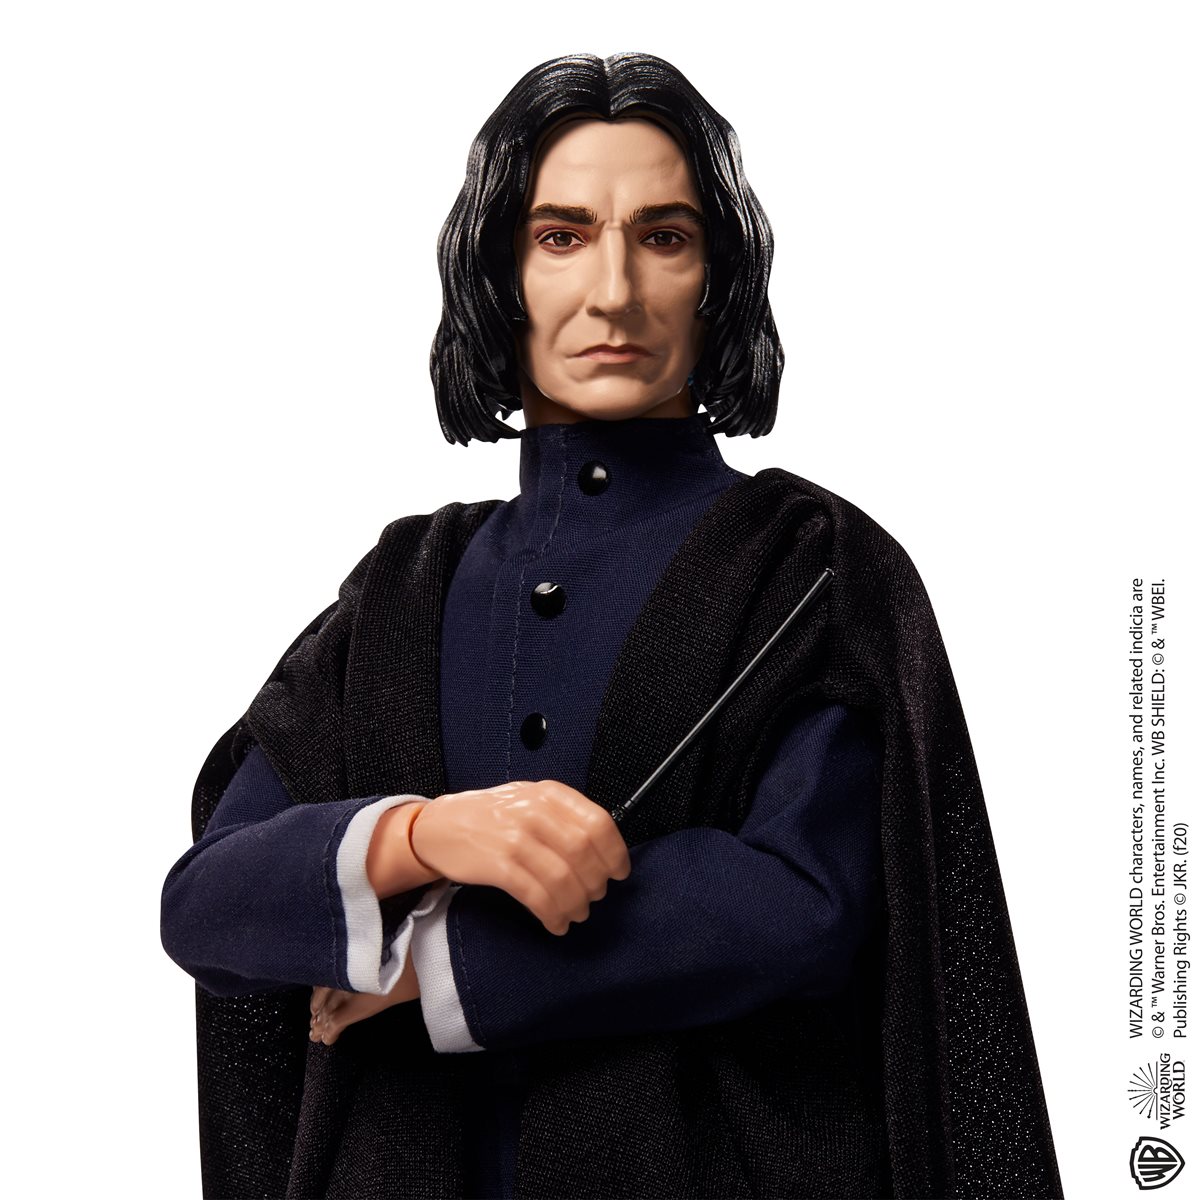 Harry Potter Doll Figures Wizarding World Various Characters Available